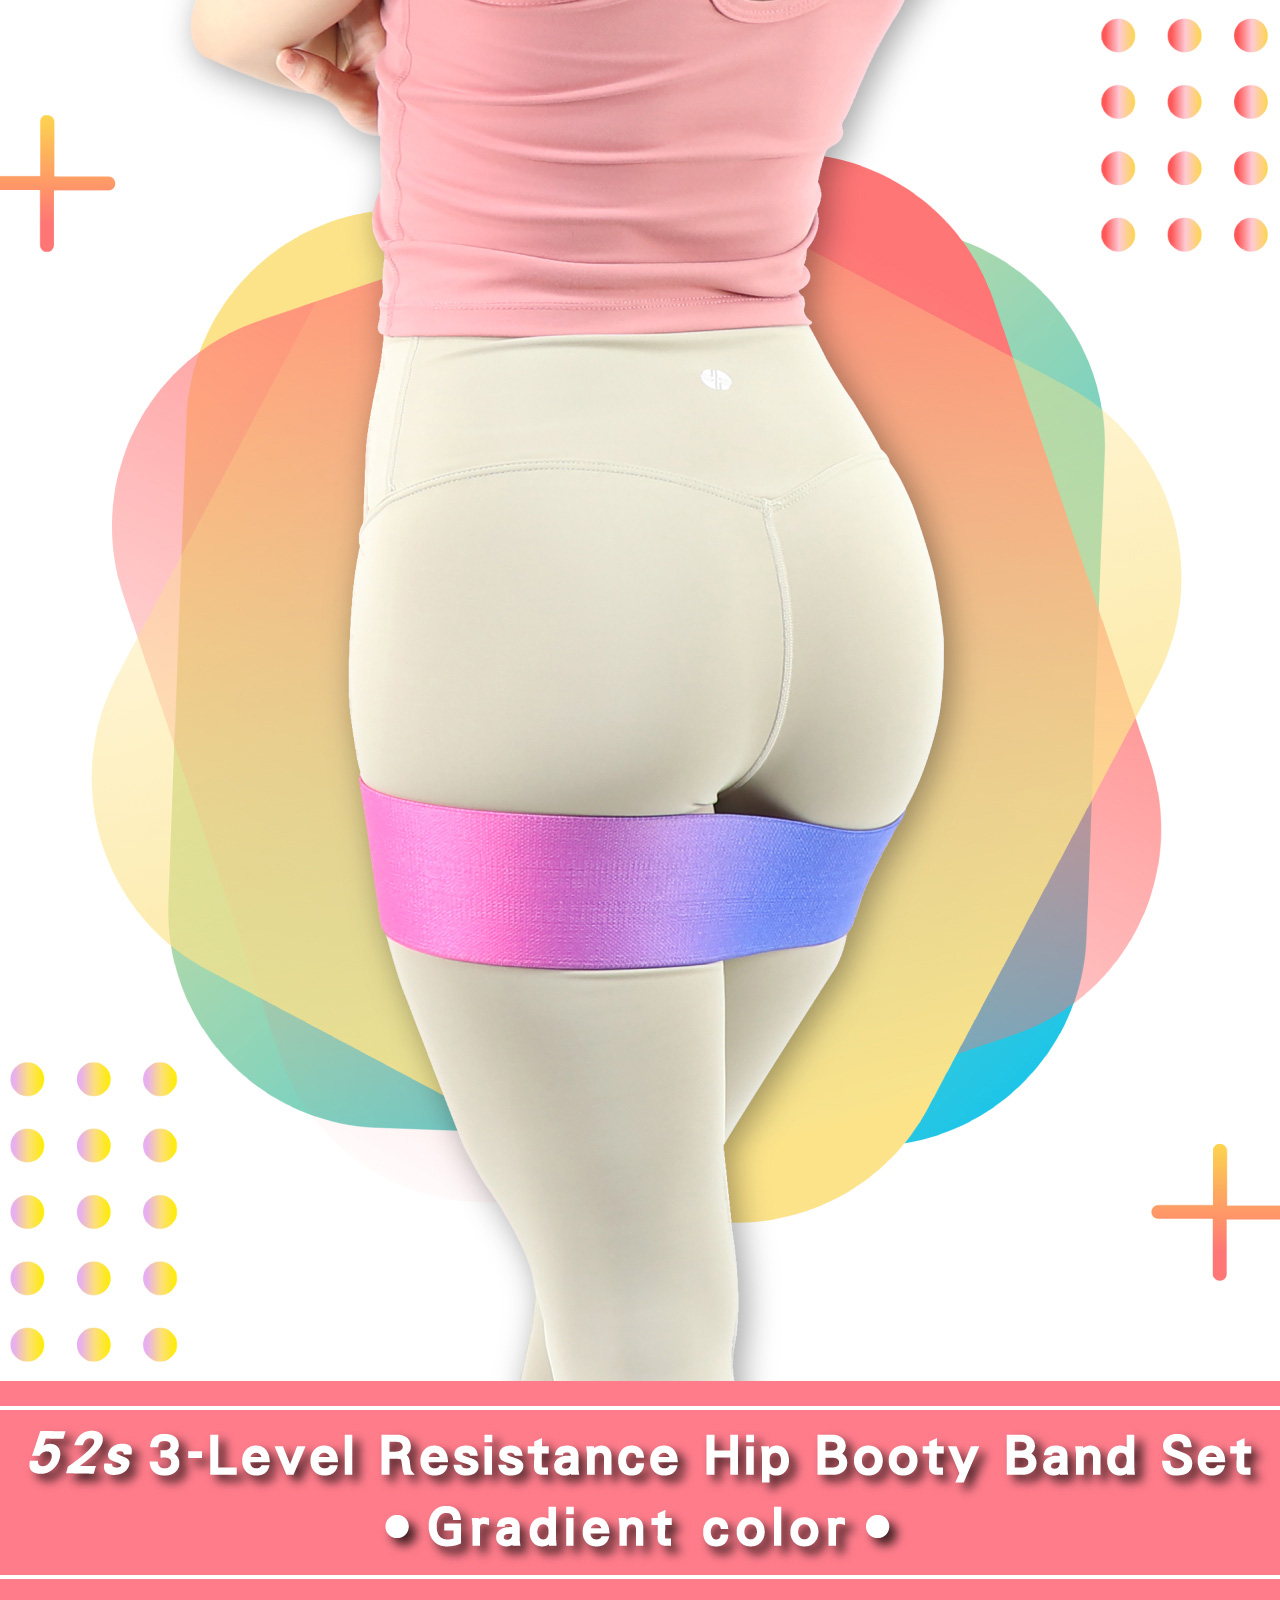 Instructions - 52s 3-Level Resistance Hip Booty Band Set Gradient color